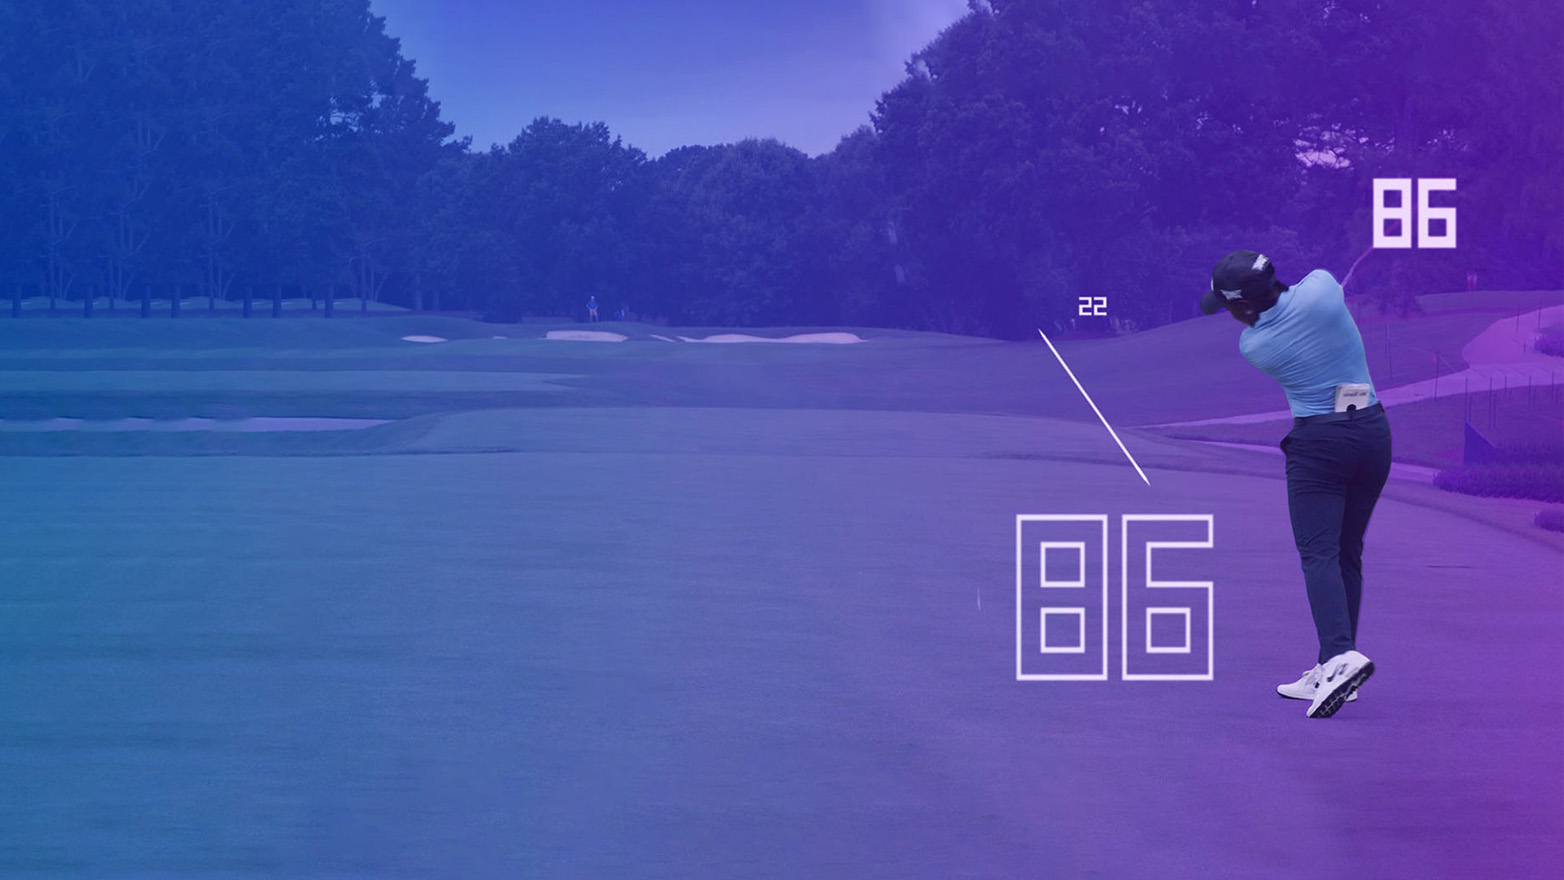 Data and analytics drive powerful new insights for the LPGA